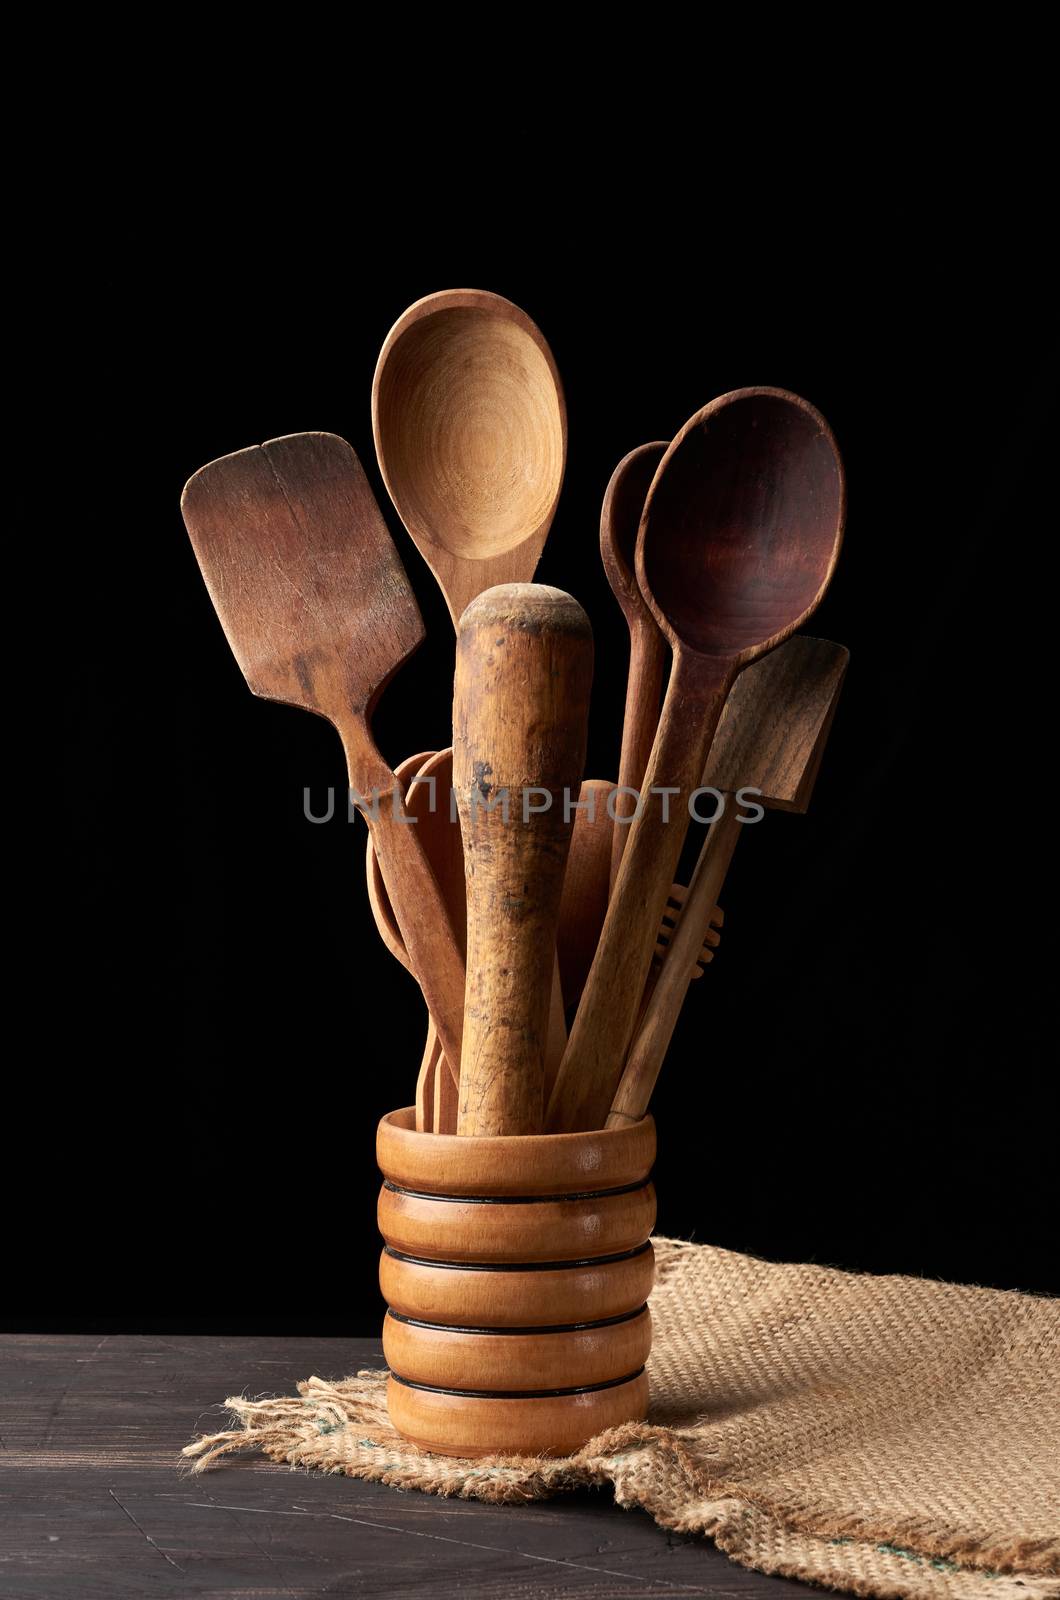 various spoons and kitchen wooden utensils in a bowl on the table, black background